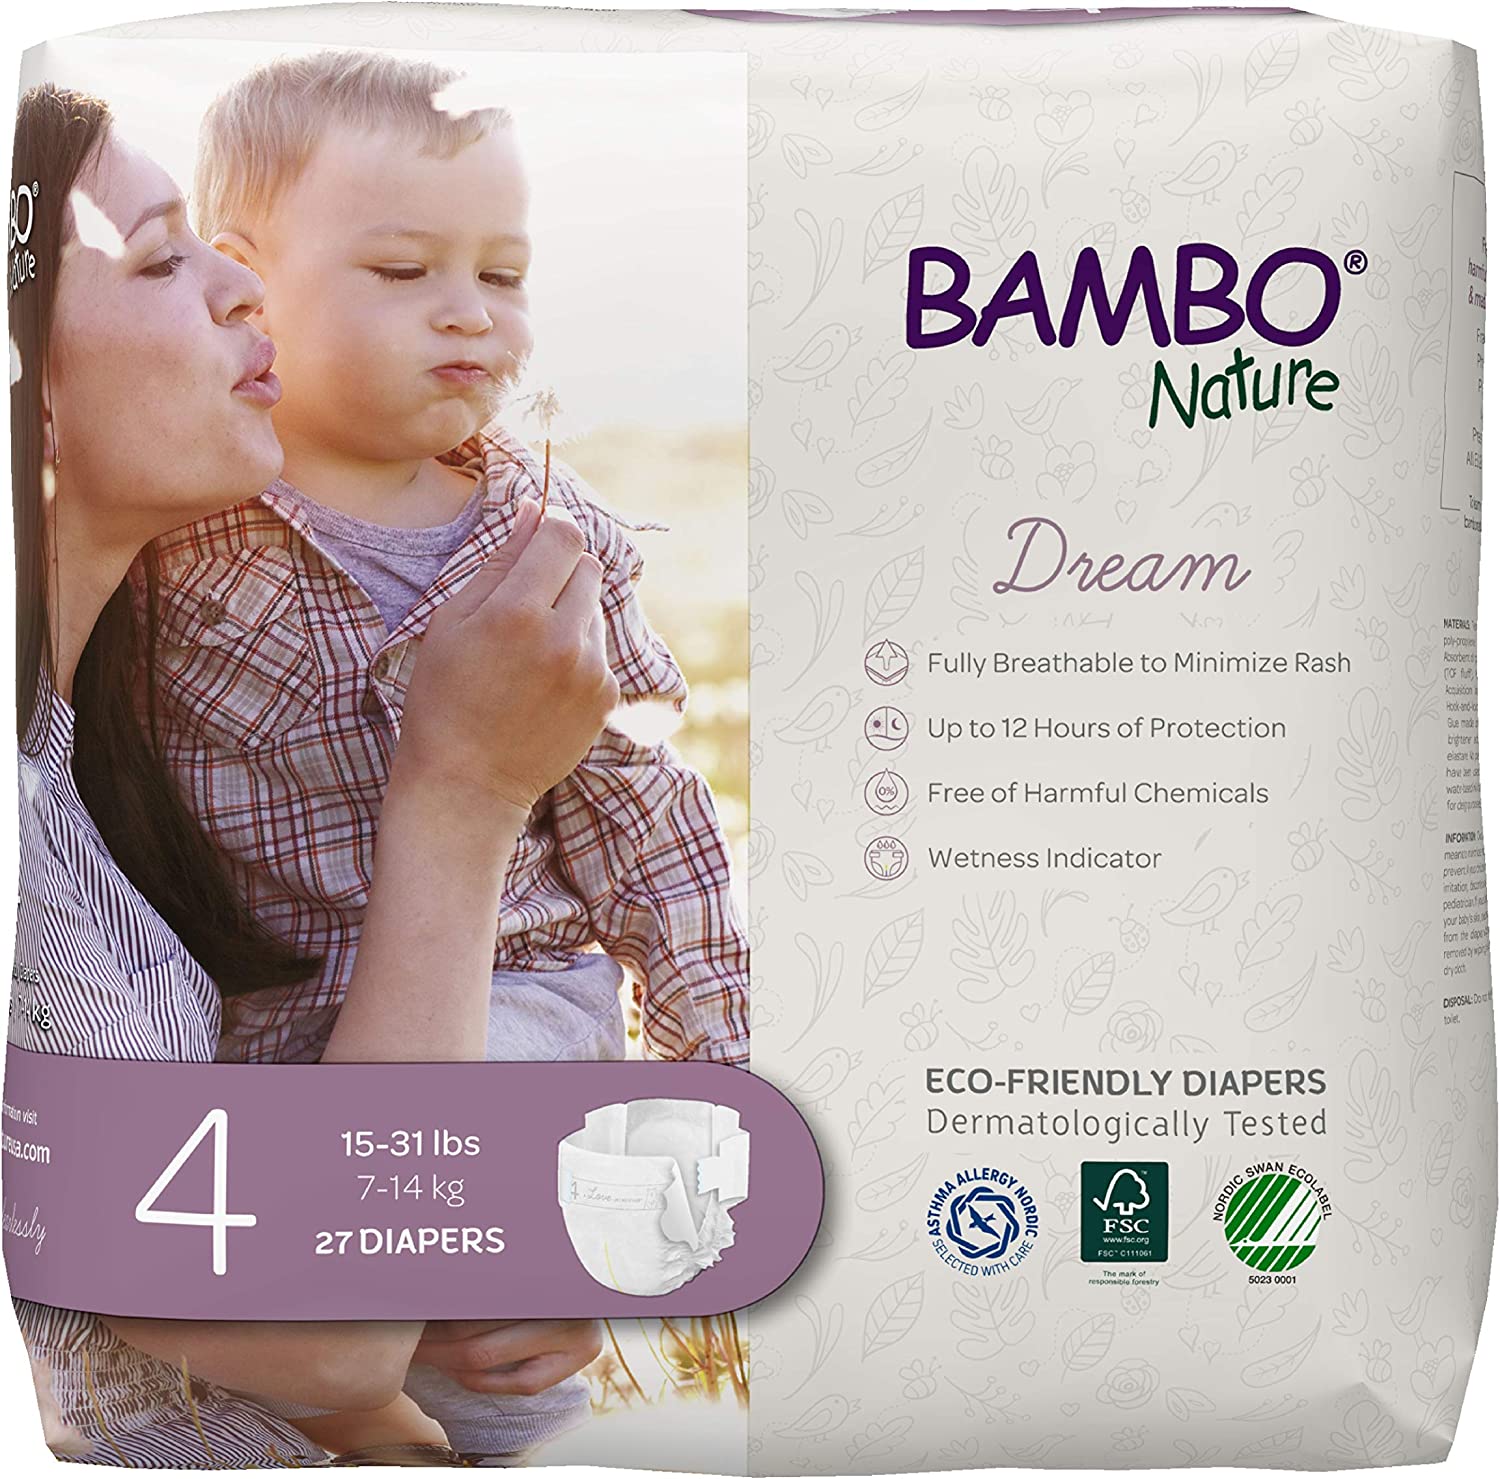 Bambo Nature Latex-Free Breathable Diapers, 27-Count